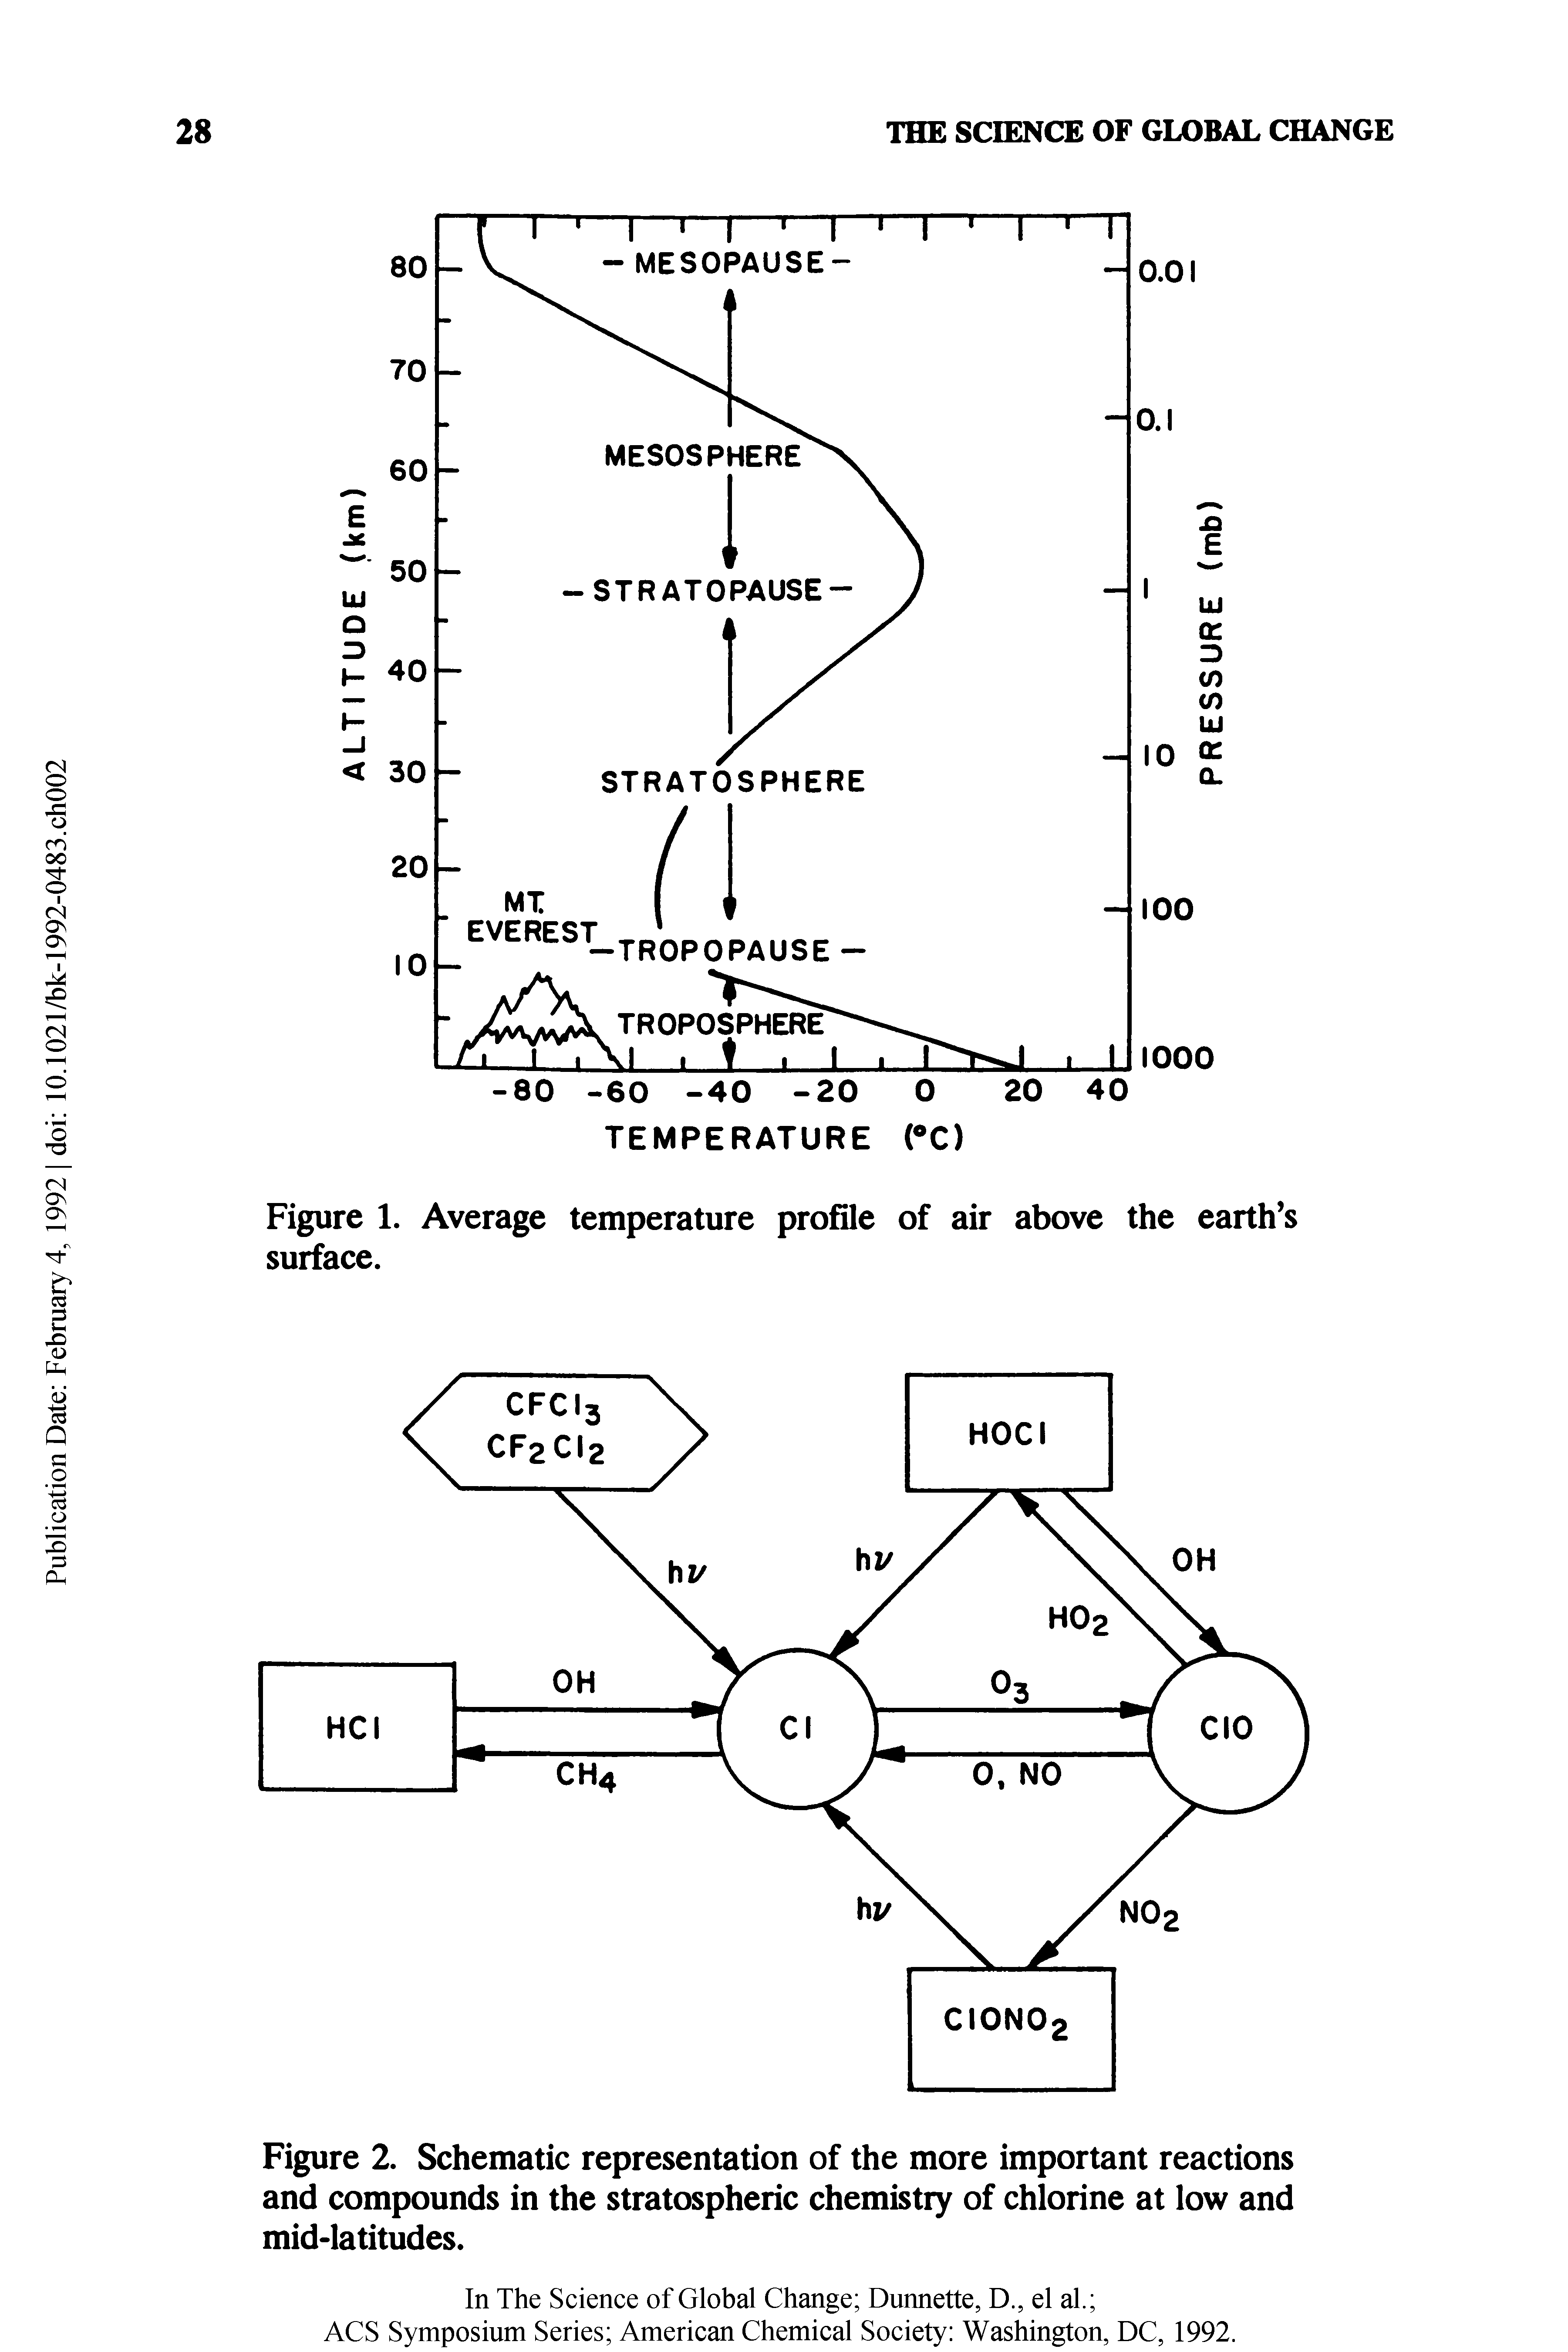 Figure 2. Schematic representation of the more important reactions and compounds in the stratospheric chemistry of chlorine at low and mid-latitudes.